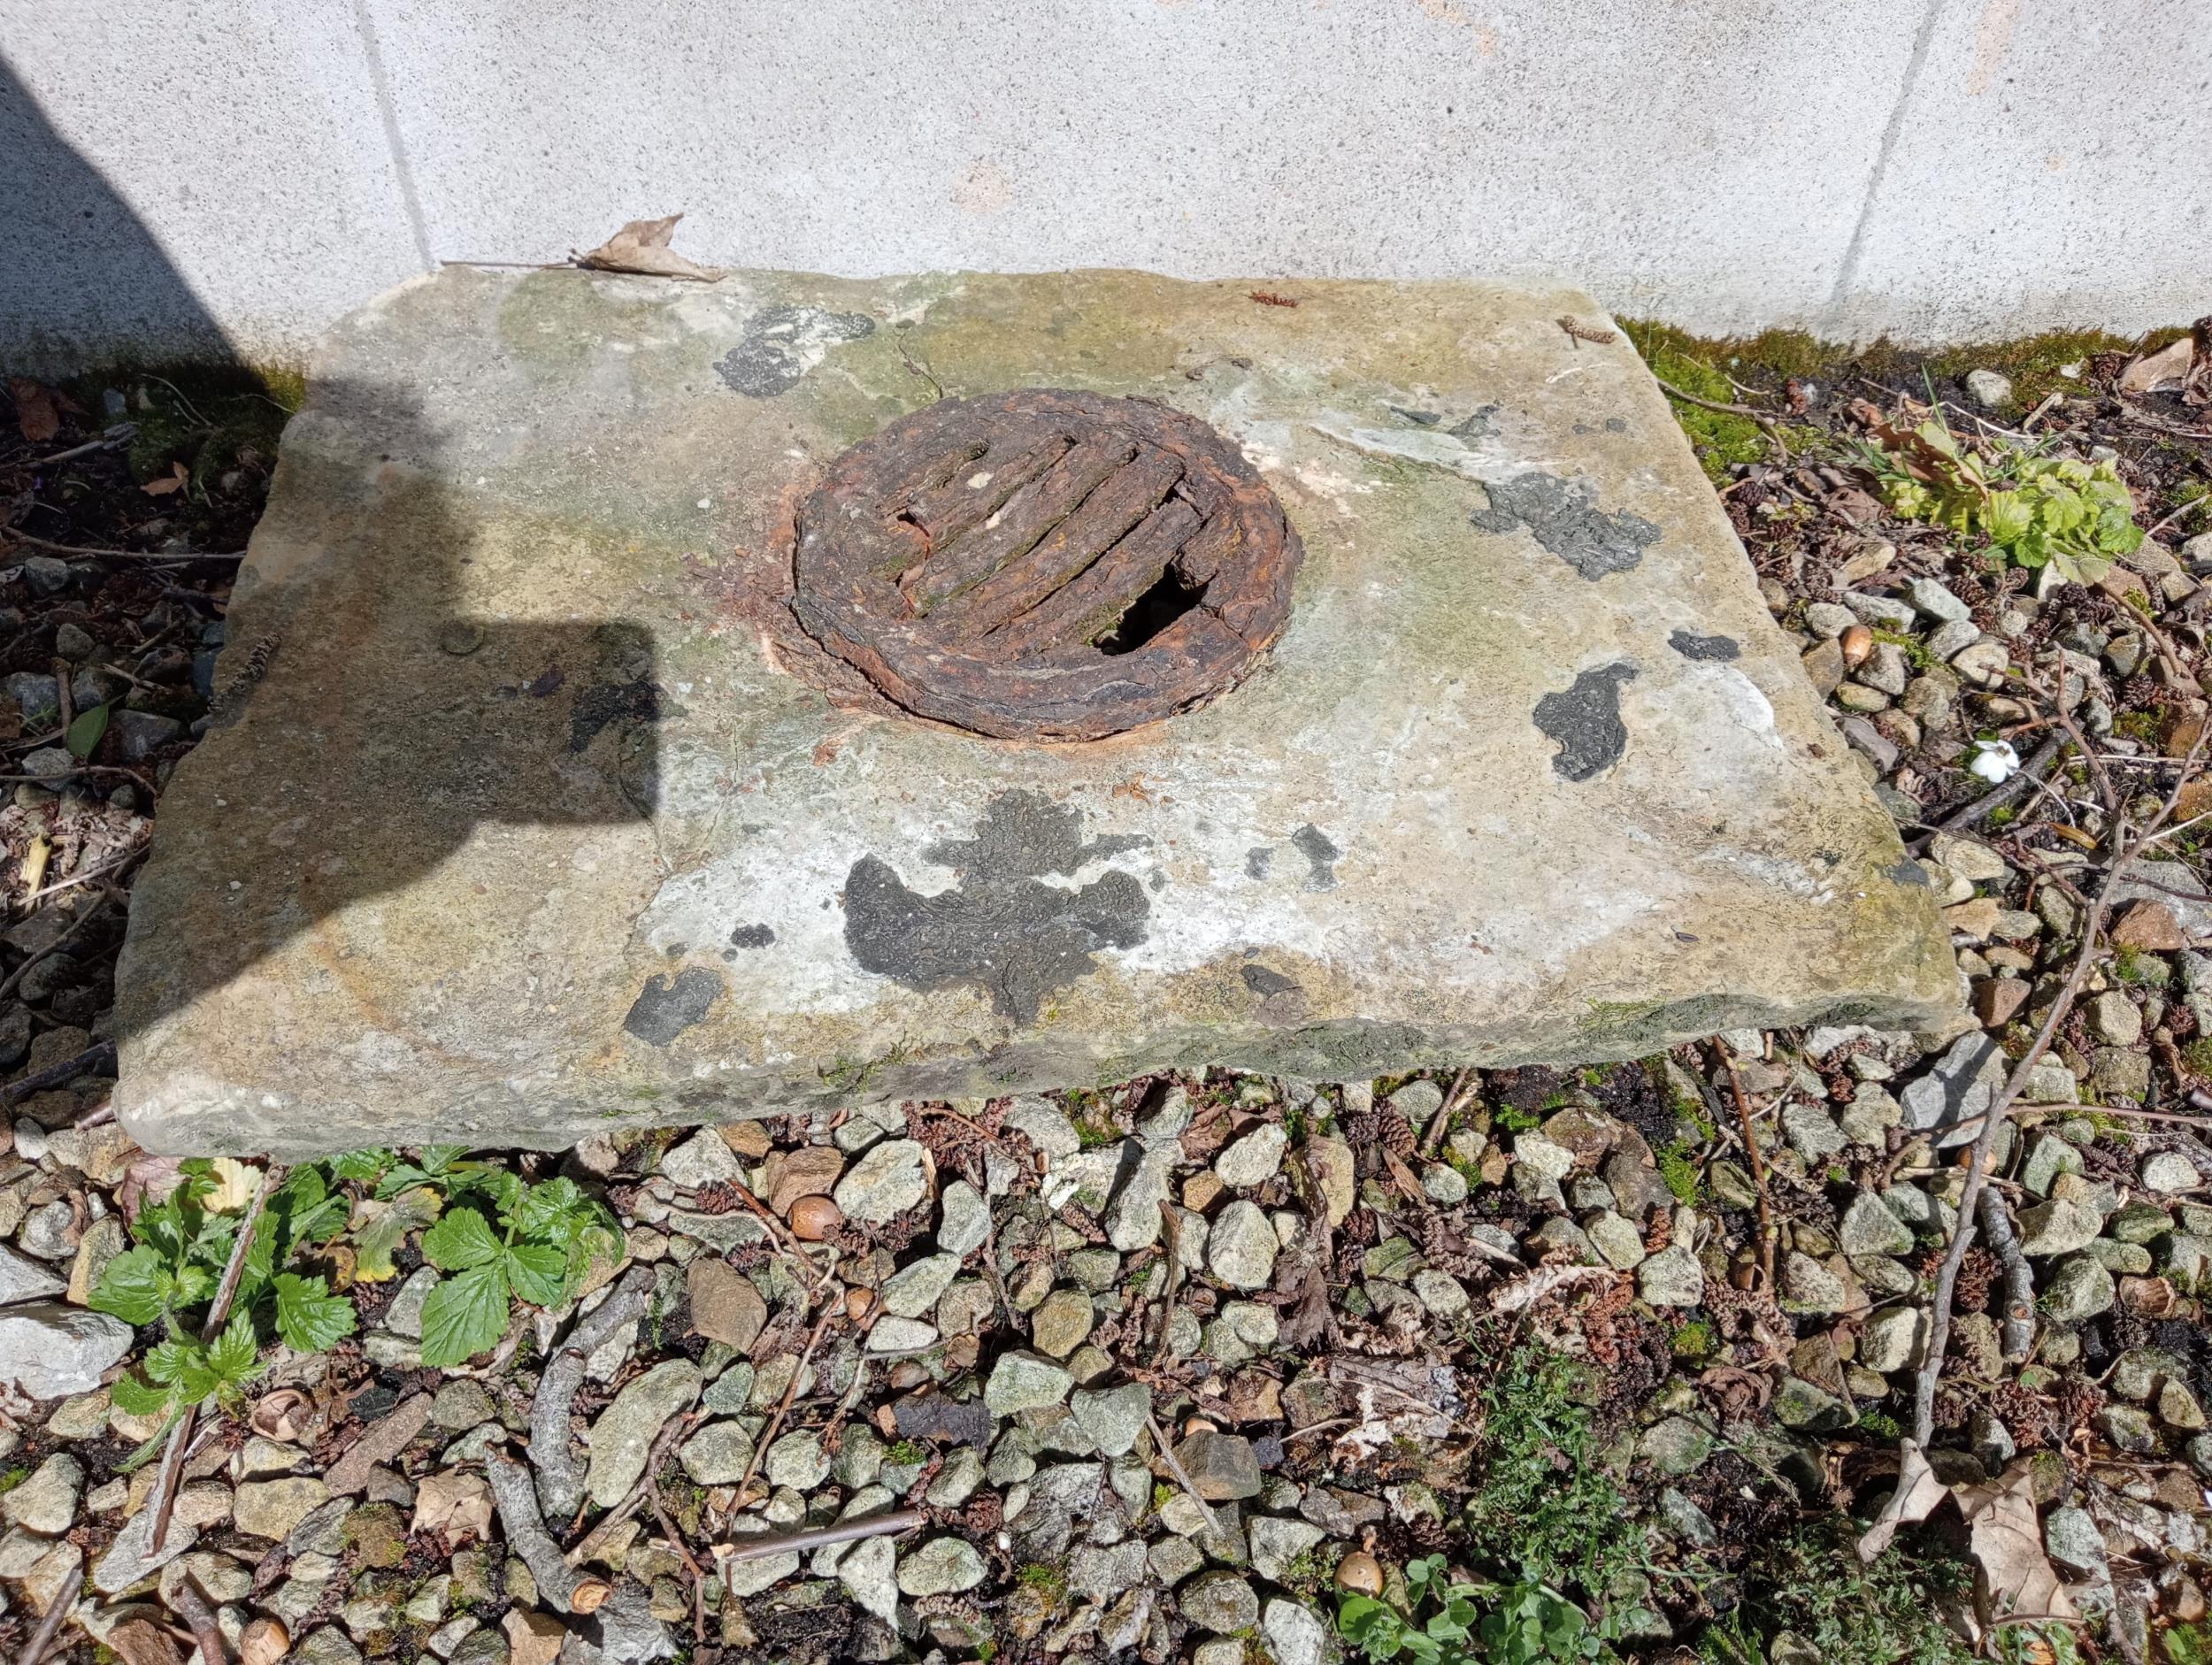 19th C. sandstone gully with original cast iron grate cover {H 8cm x W 60cm x D 46cm }. (NOT